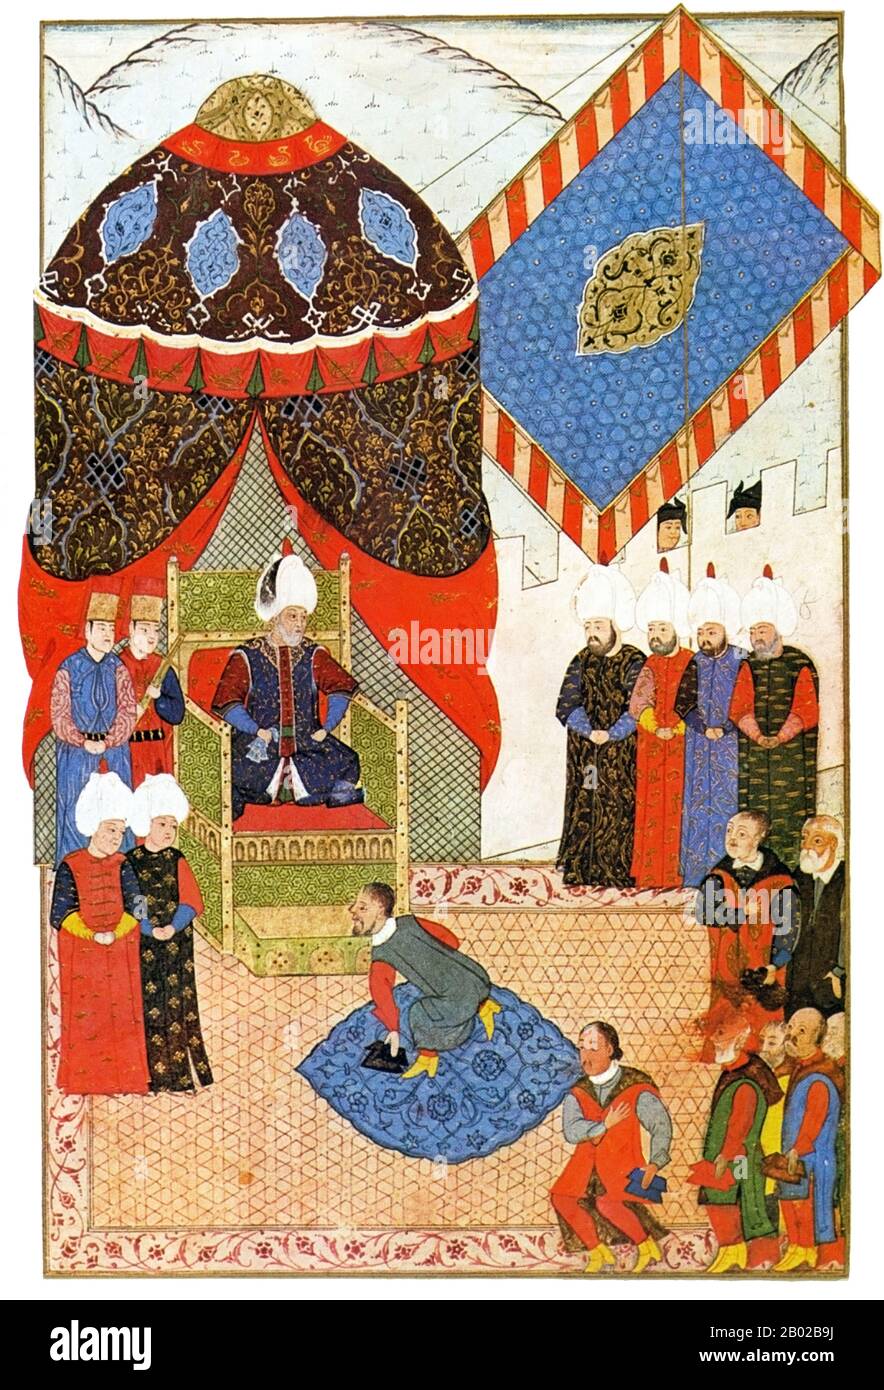 Sultan Suleyman I (1494-1566), also known as 'Suleyman the Magnificent' and 'Suleyman the Lawmaker', was the 10th and longest reigning sultan of the Ottoman empire.  He personally led his armies to conquer Transylvania, the Caspian, much of the Middle East and the Maghreb. He intoduced sweeping reforms in Turkish legislation, education, taxation and criminal law, and was highly respected as a poet and a goldsmith. Suleyman also oversaw a golden age in the development of arts, literature and architecture in the Ottoman empire. Stock Photo